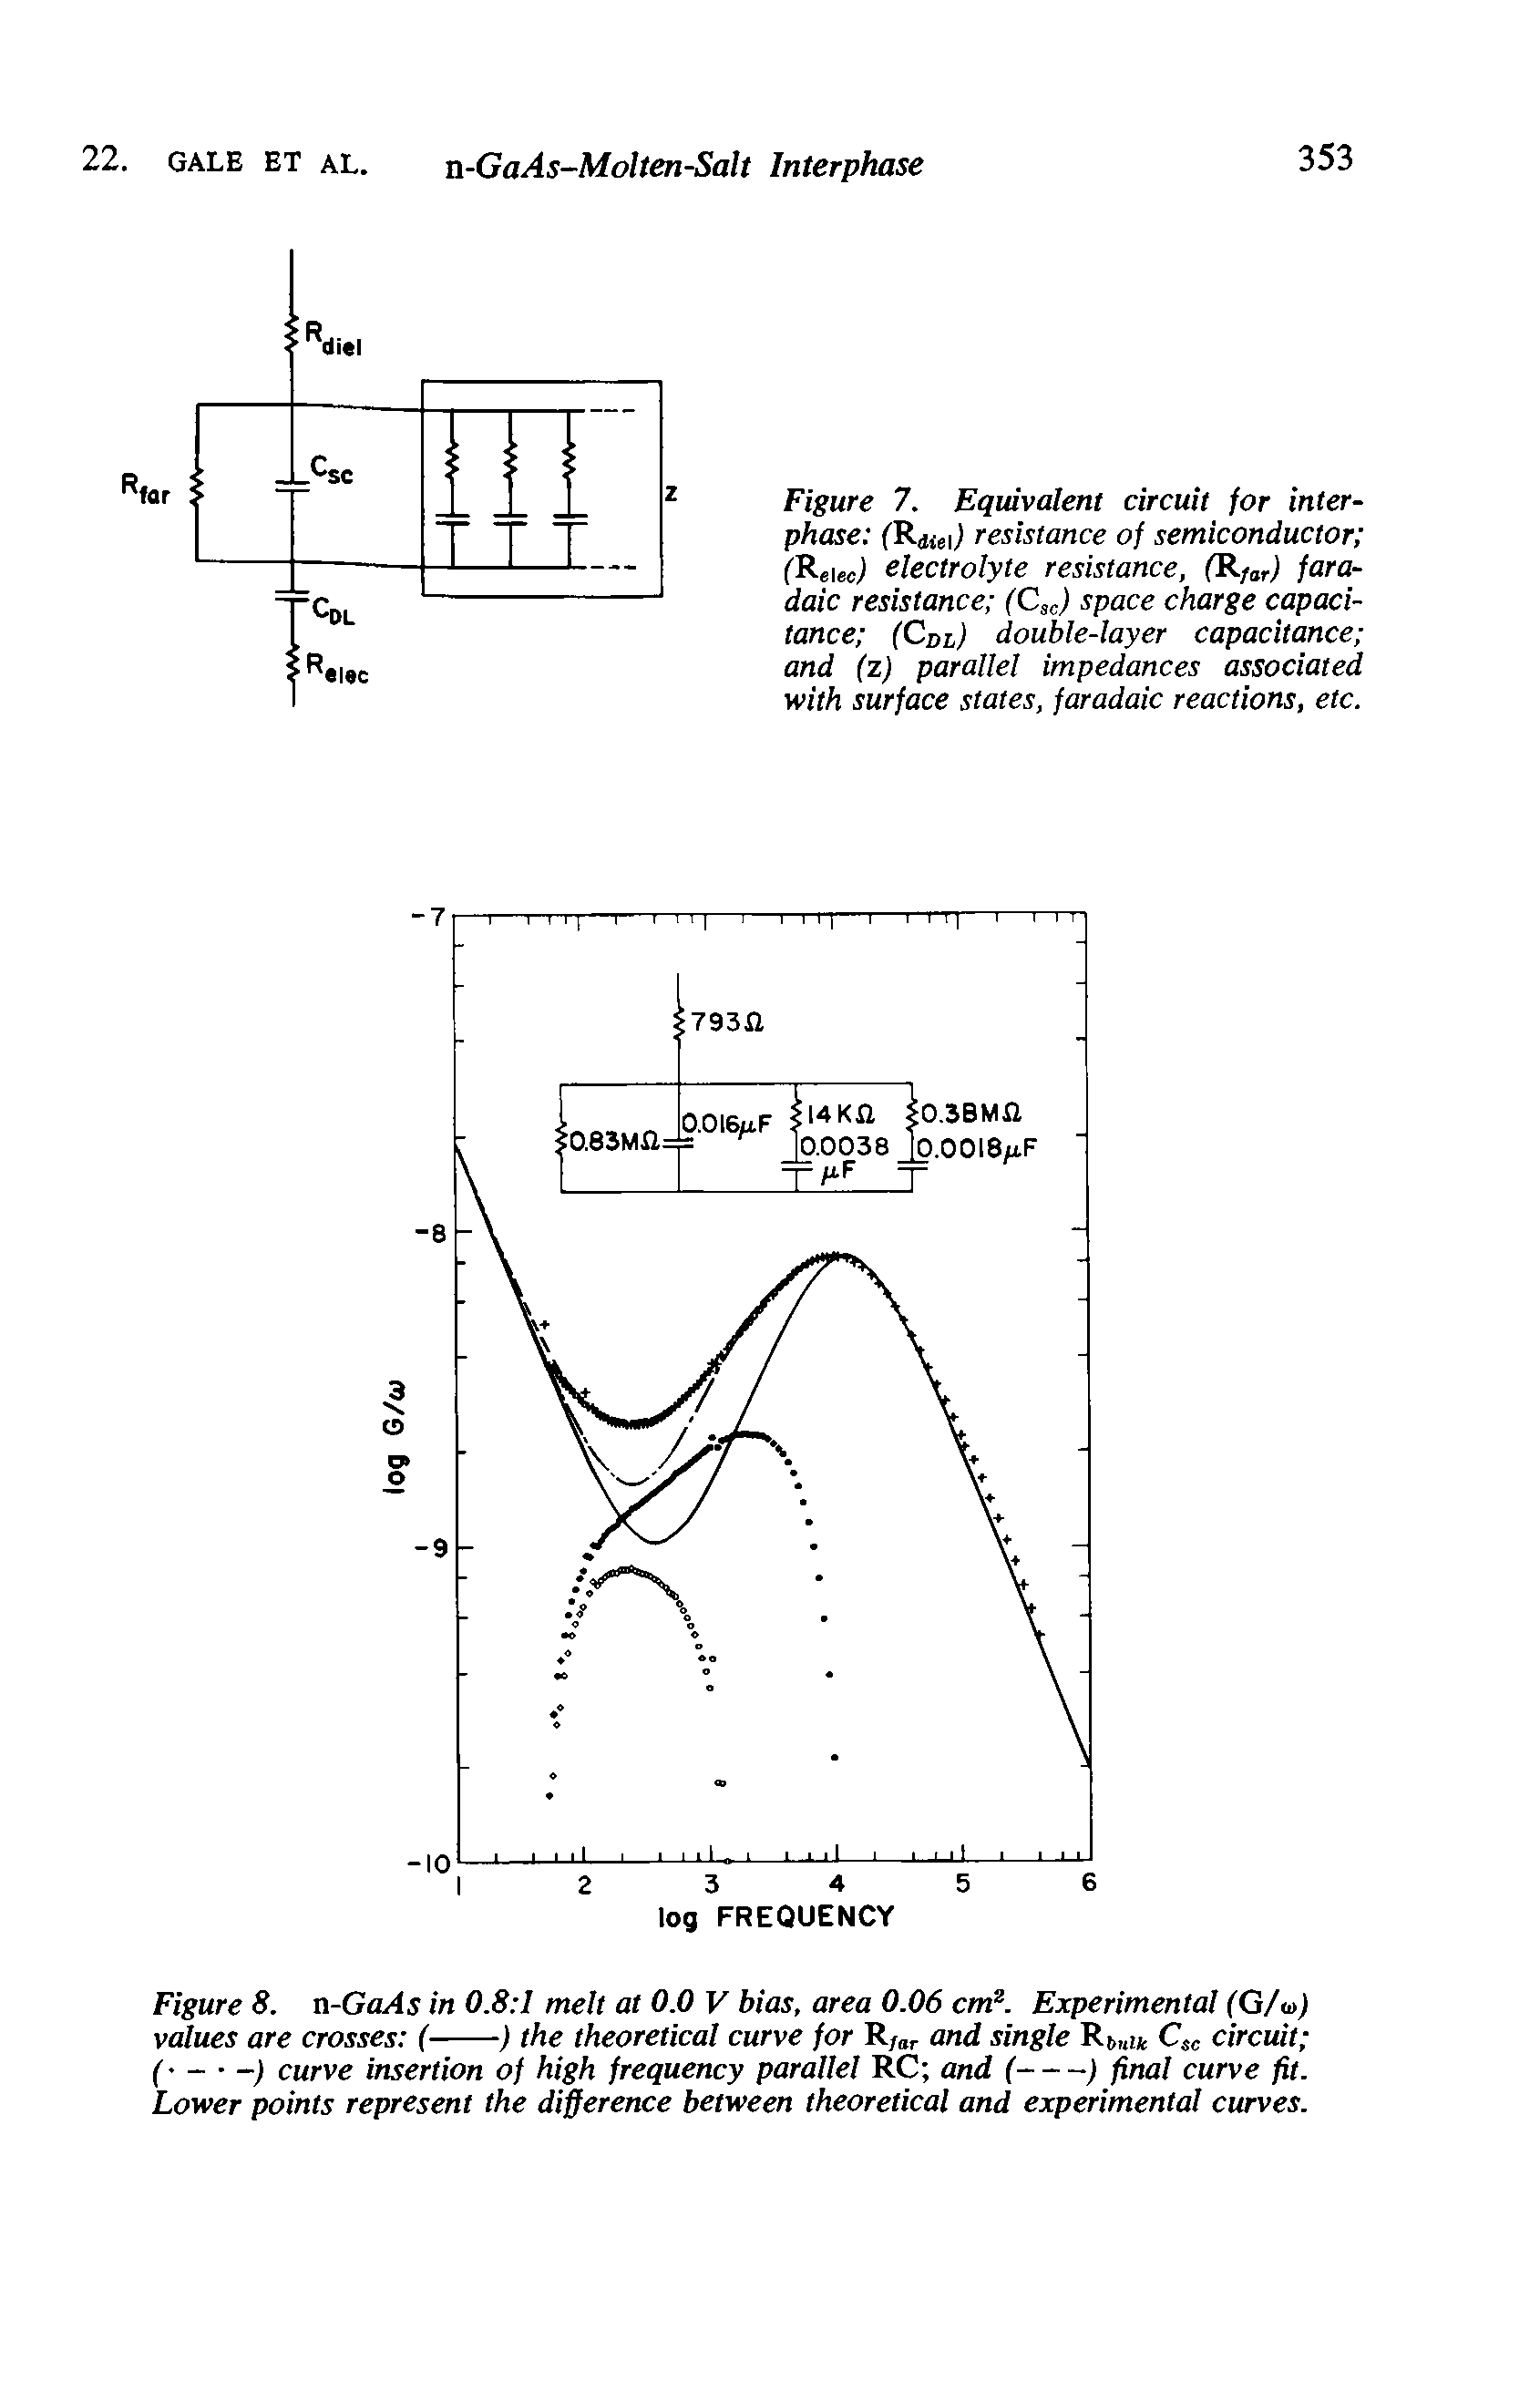 Figure 7. Equivalent circuit for interphase (Raei) resistance of semiconductor (Retec) electrolyte resistance, (Rfar) fara-daic resistance (Csc) space charge capacitance (CDl) double-layer capacitance and (z) parallel impedances associated with surface states, faradaic reactions, etc.